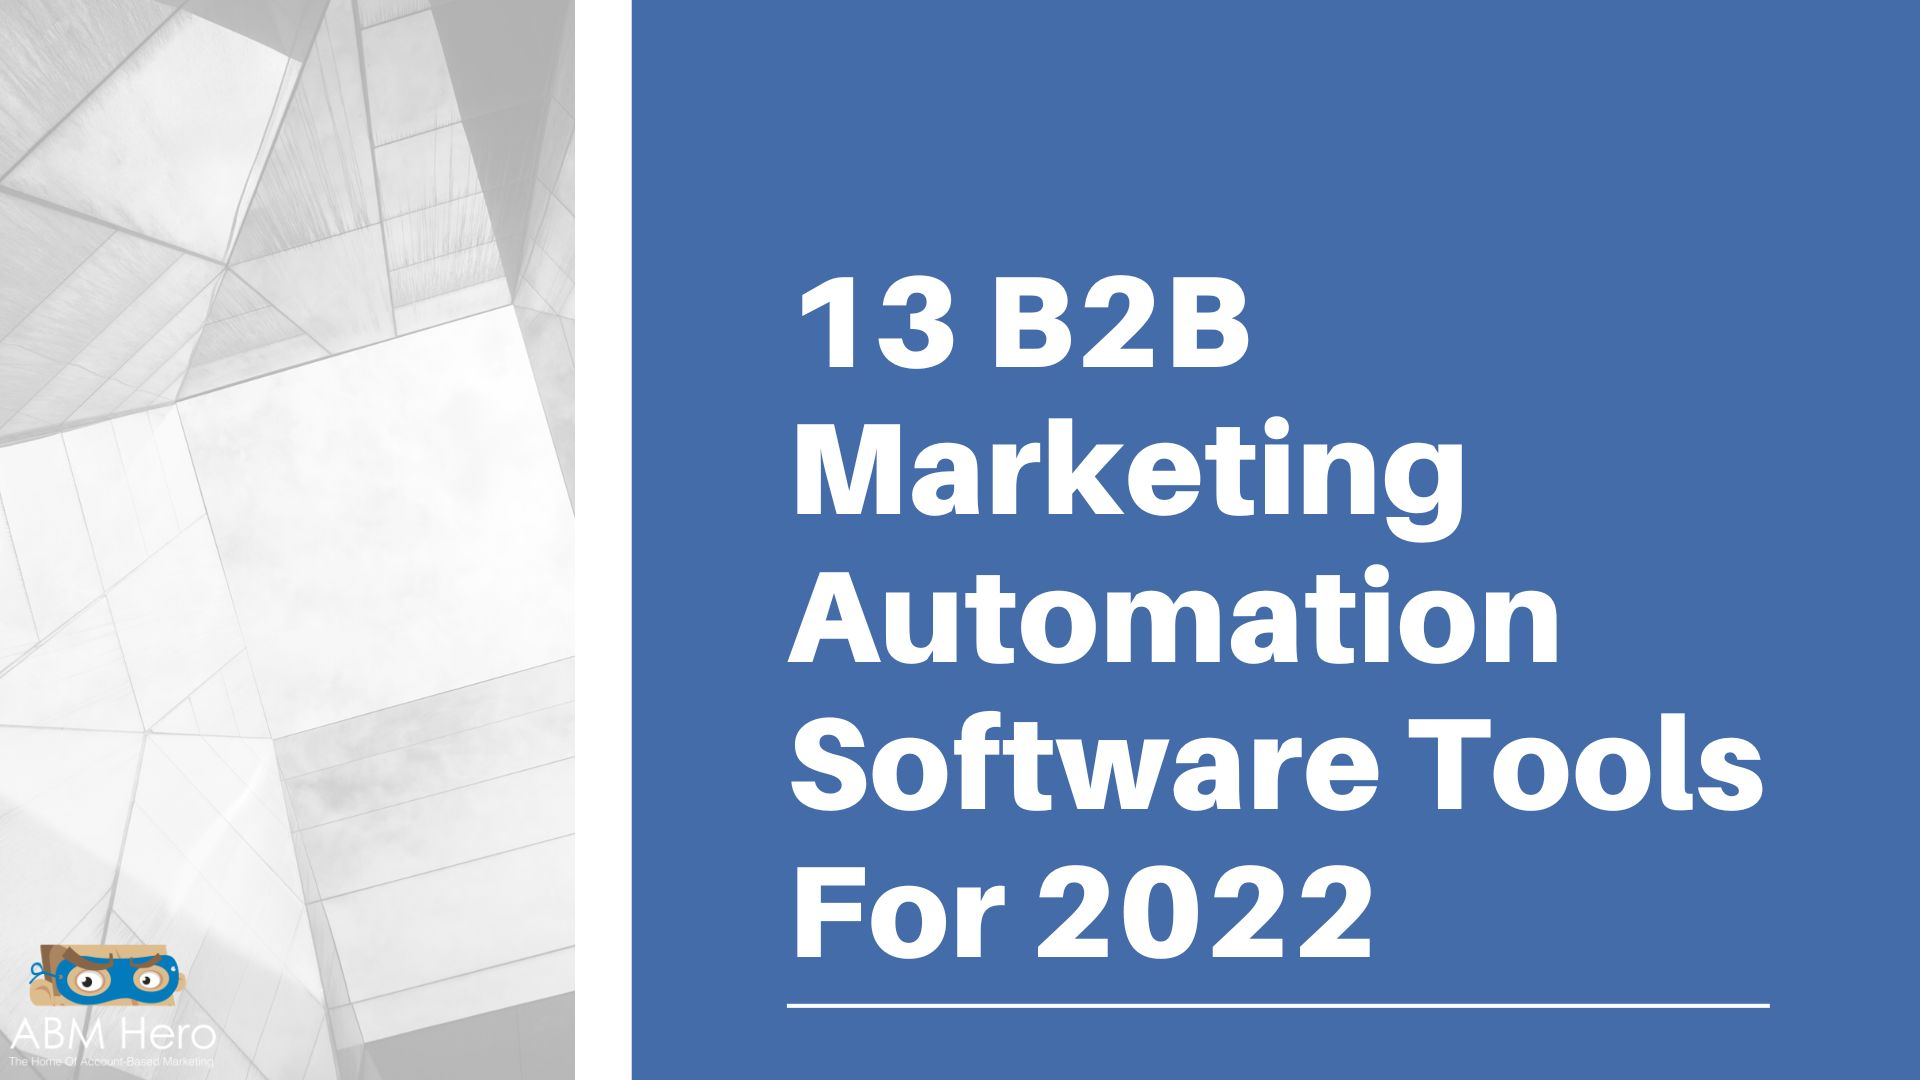 13 B2B Marketing Automation Software Tools For 2022